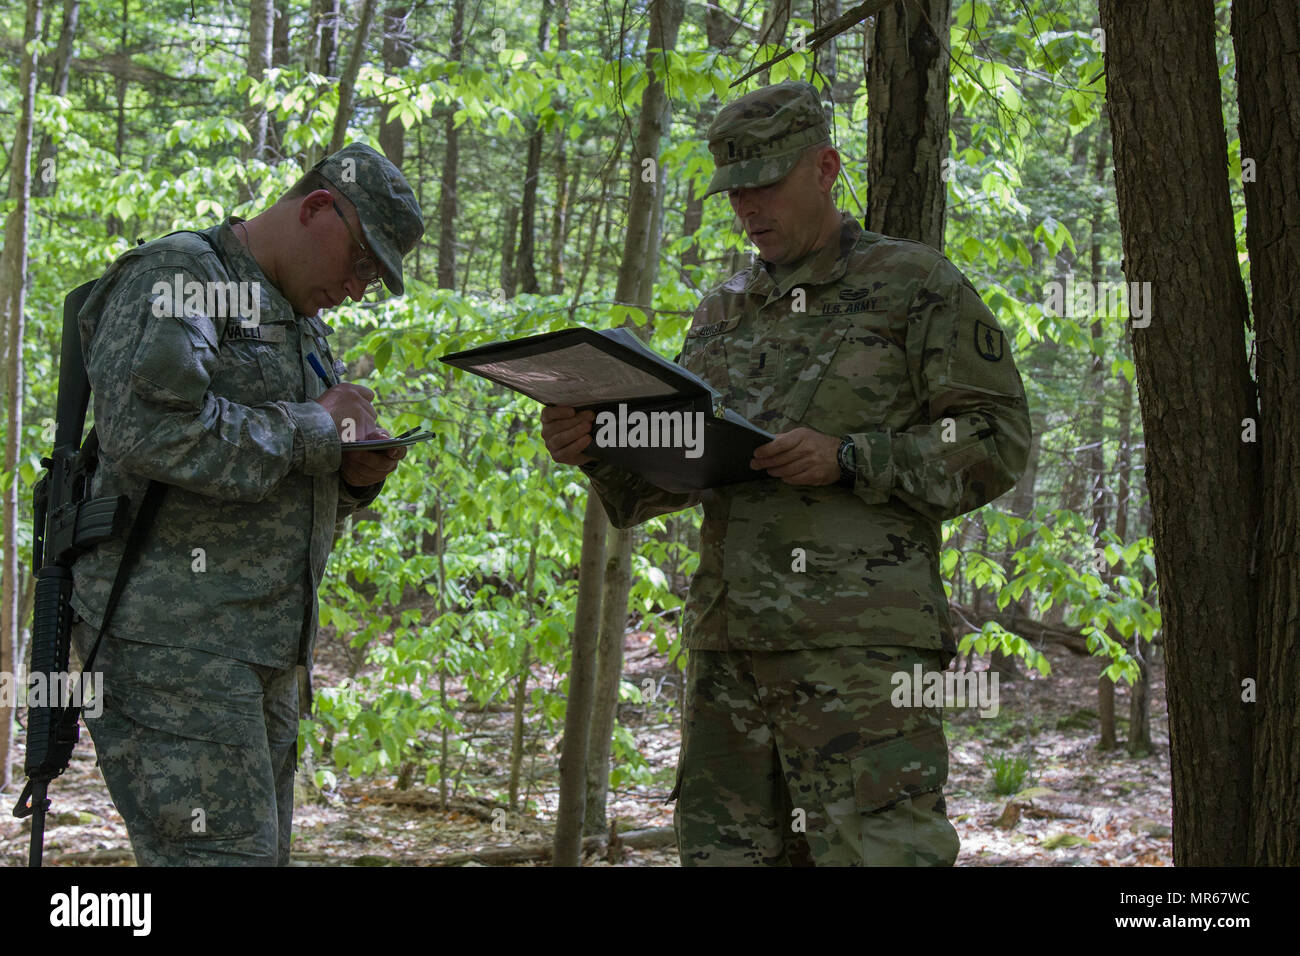 A U.S. Army officer candidate, acting as squad leader, receives operations order for a reconnaissance operations lane at New Hampshire National Guard Training Site in Center Strafford, Nh., May 19, 2017. Soldiers from Connecticut, Maine, Massachusetts, New Hampshire, New Jersey, New York, Rhode Island, and Vermont participated in the Officer Candidate School Field Leadership Exercise in preparation for graduation and commission. (U.S. Army National Guard photo by Spc. Avery Cunningham) Stock Photo